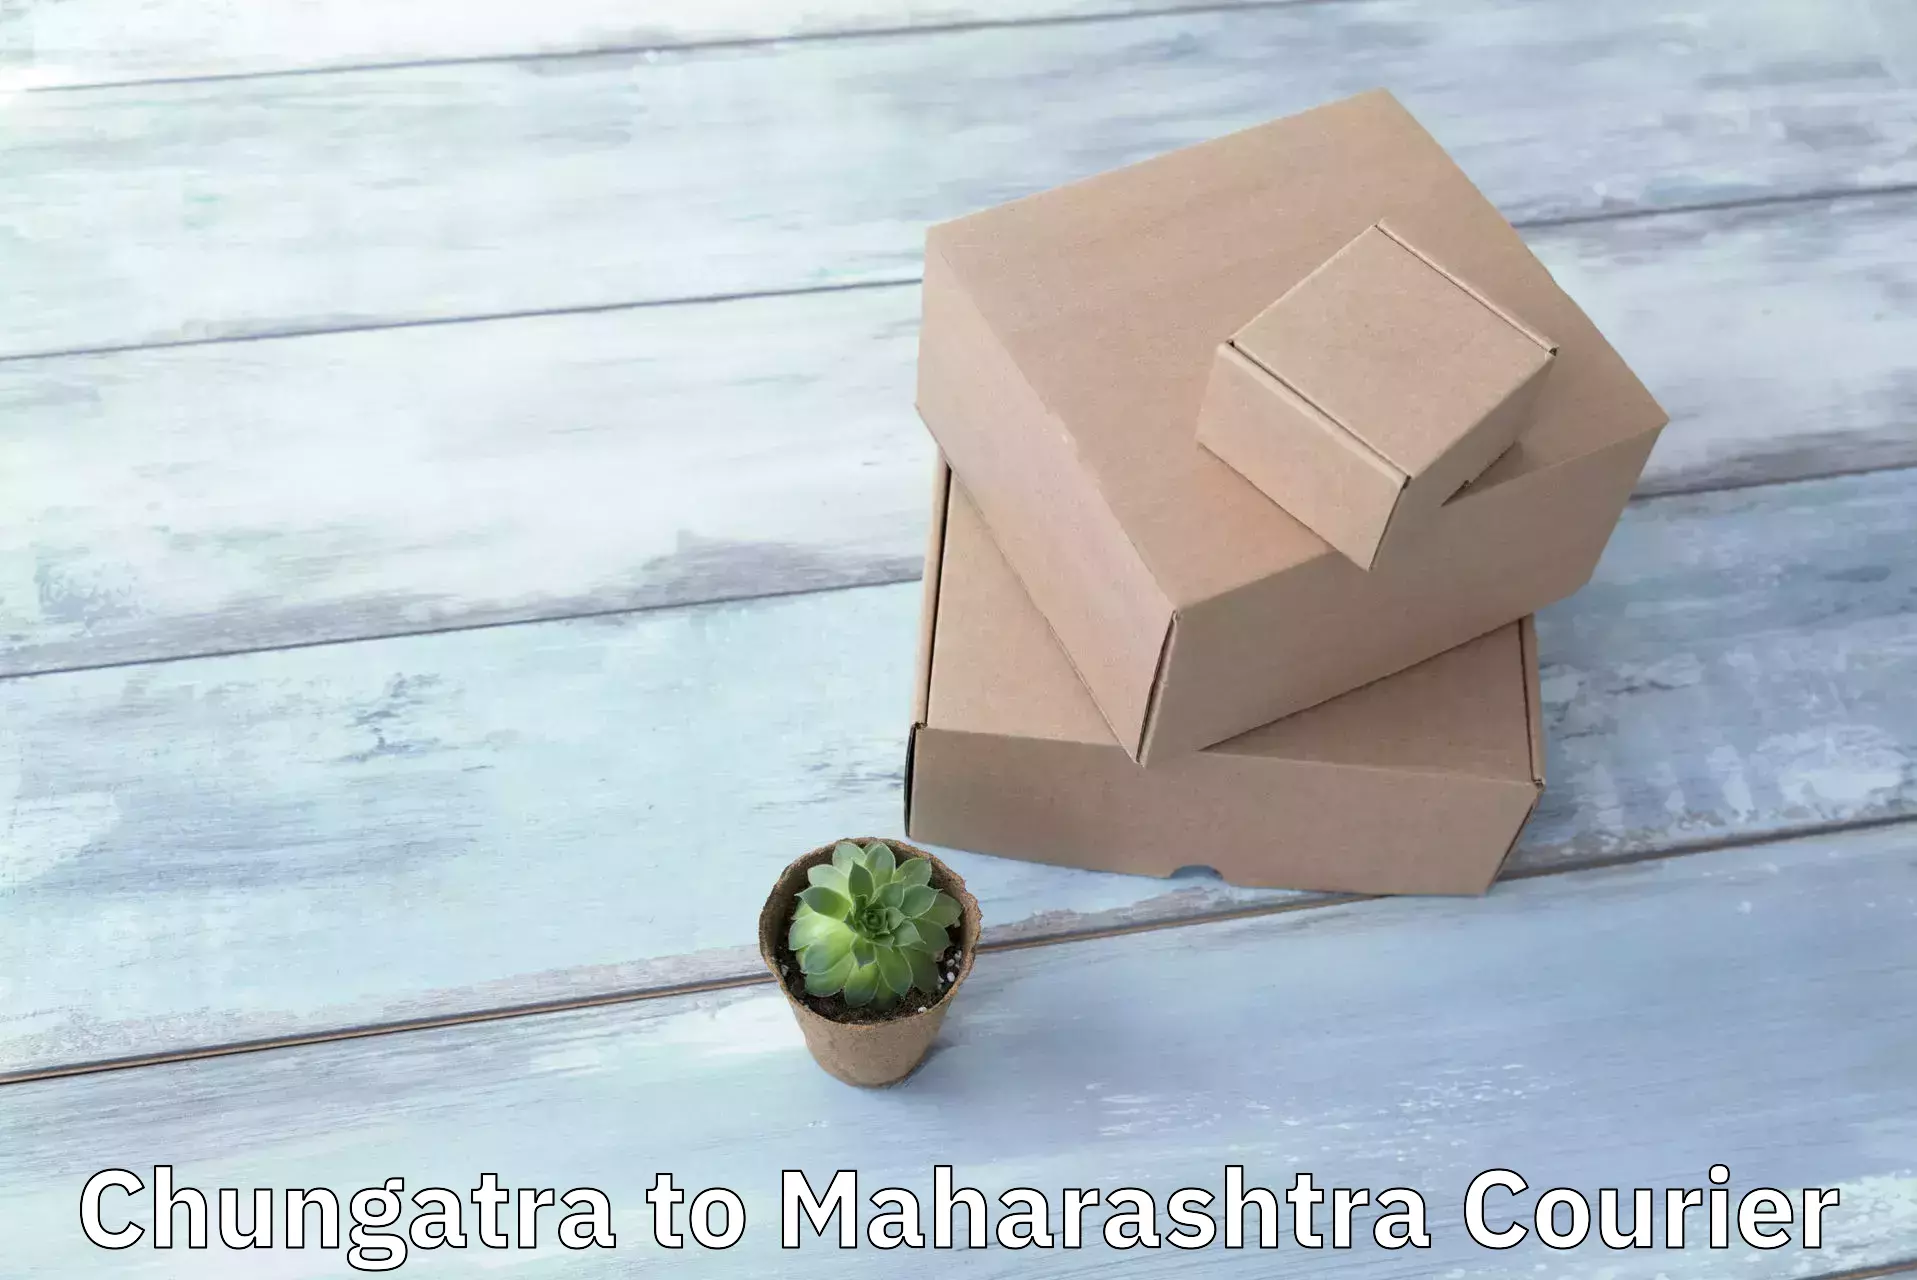 Large package courier Chungatra to Nagpur